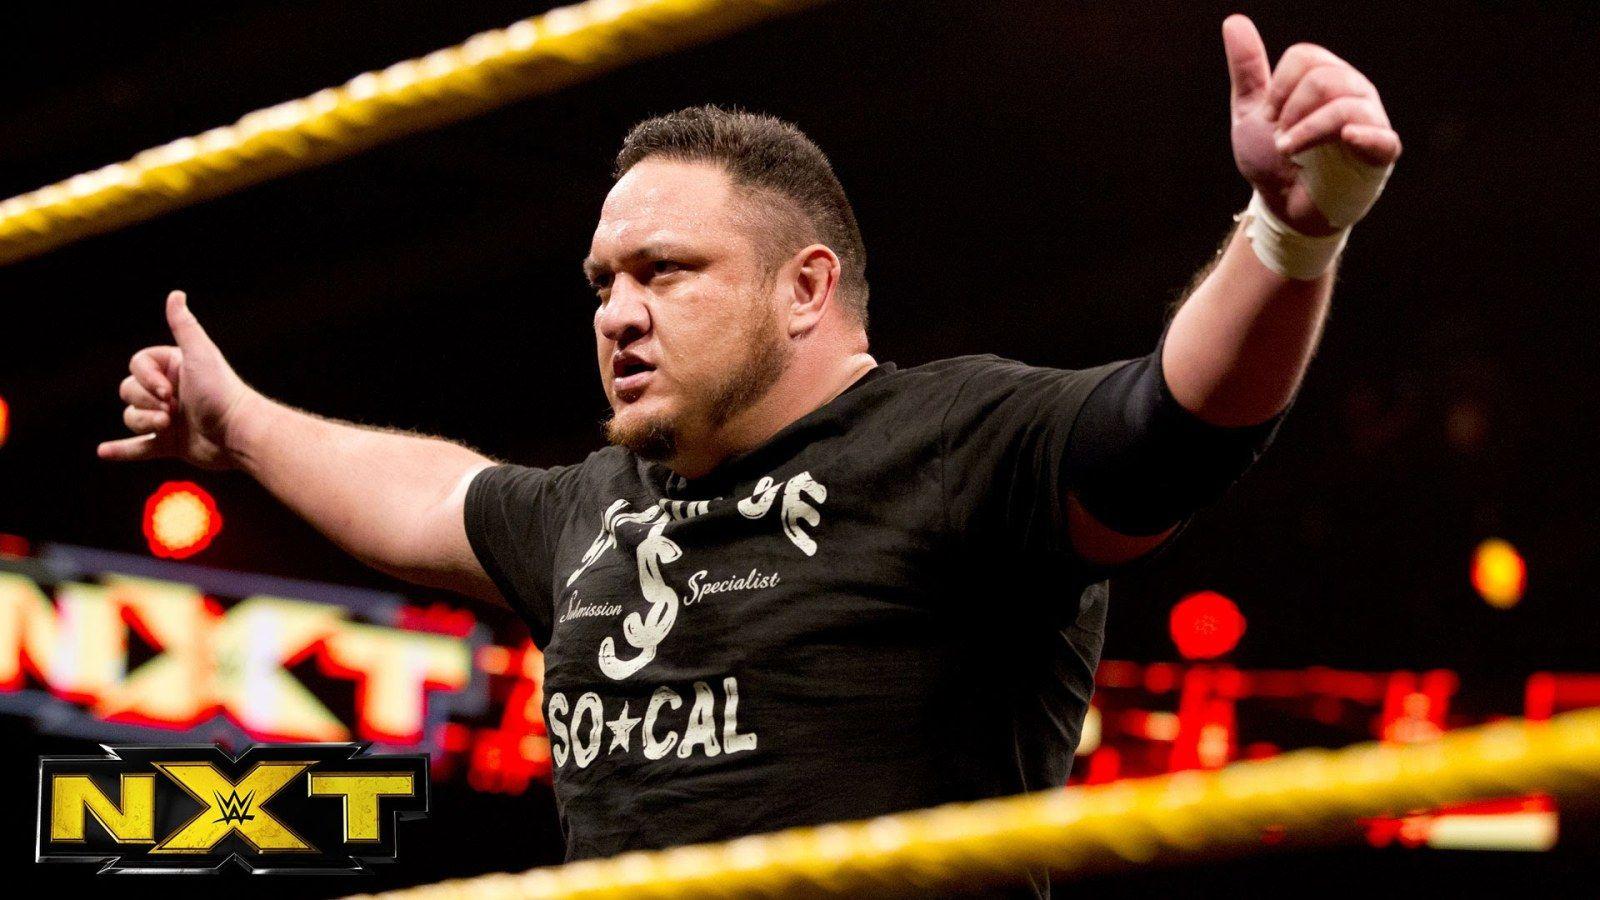 Some Big WrestleMania Plans Maybe In The Works For Samoa Joe